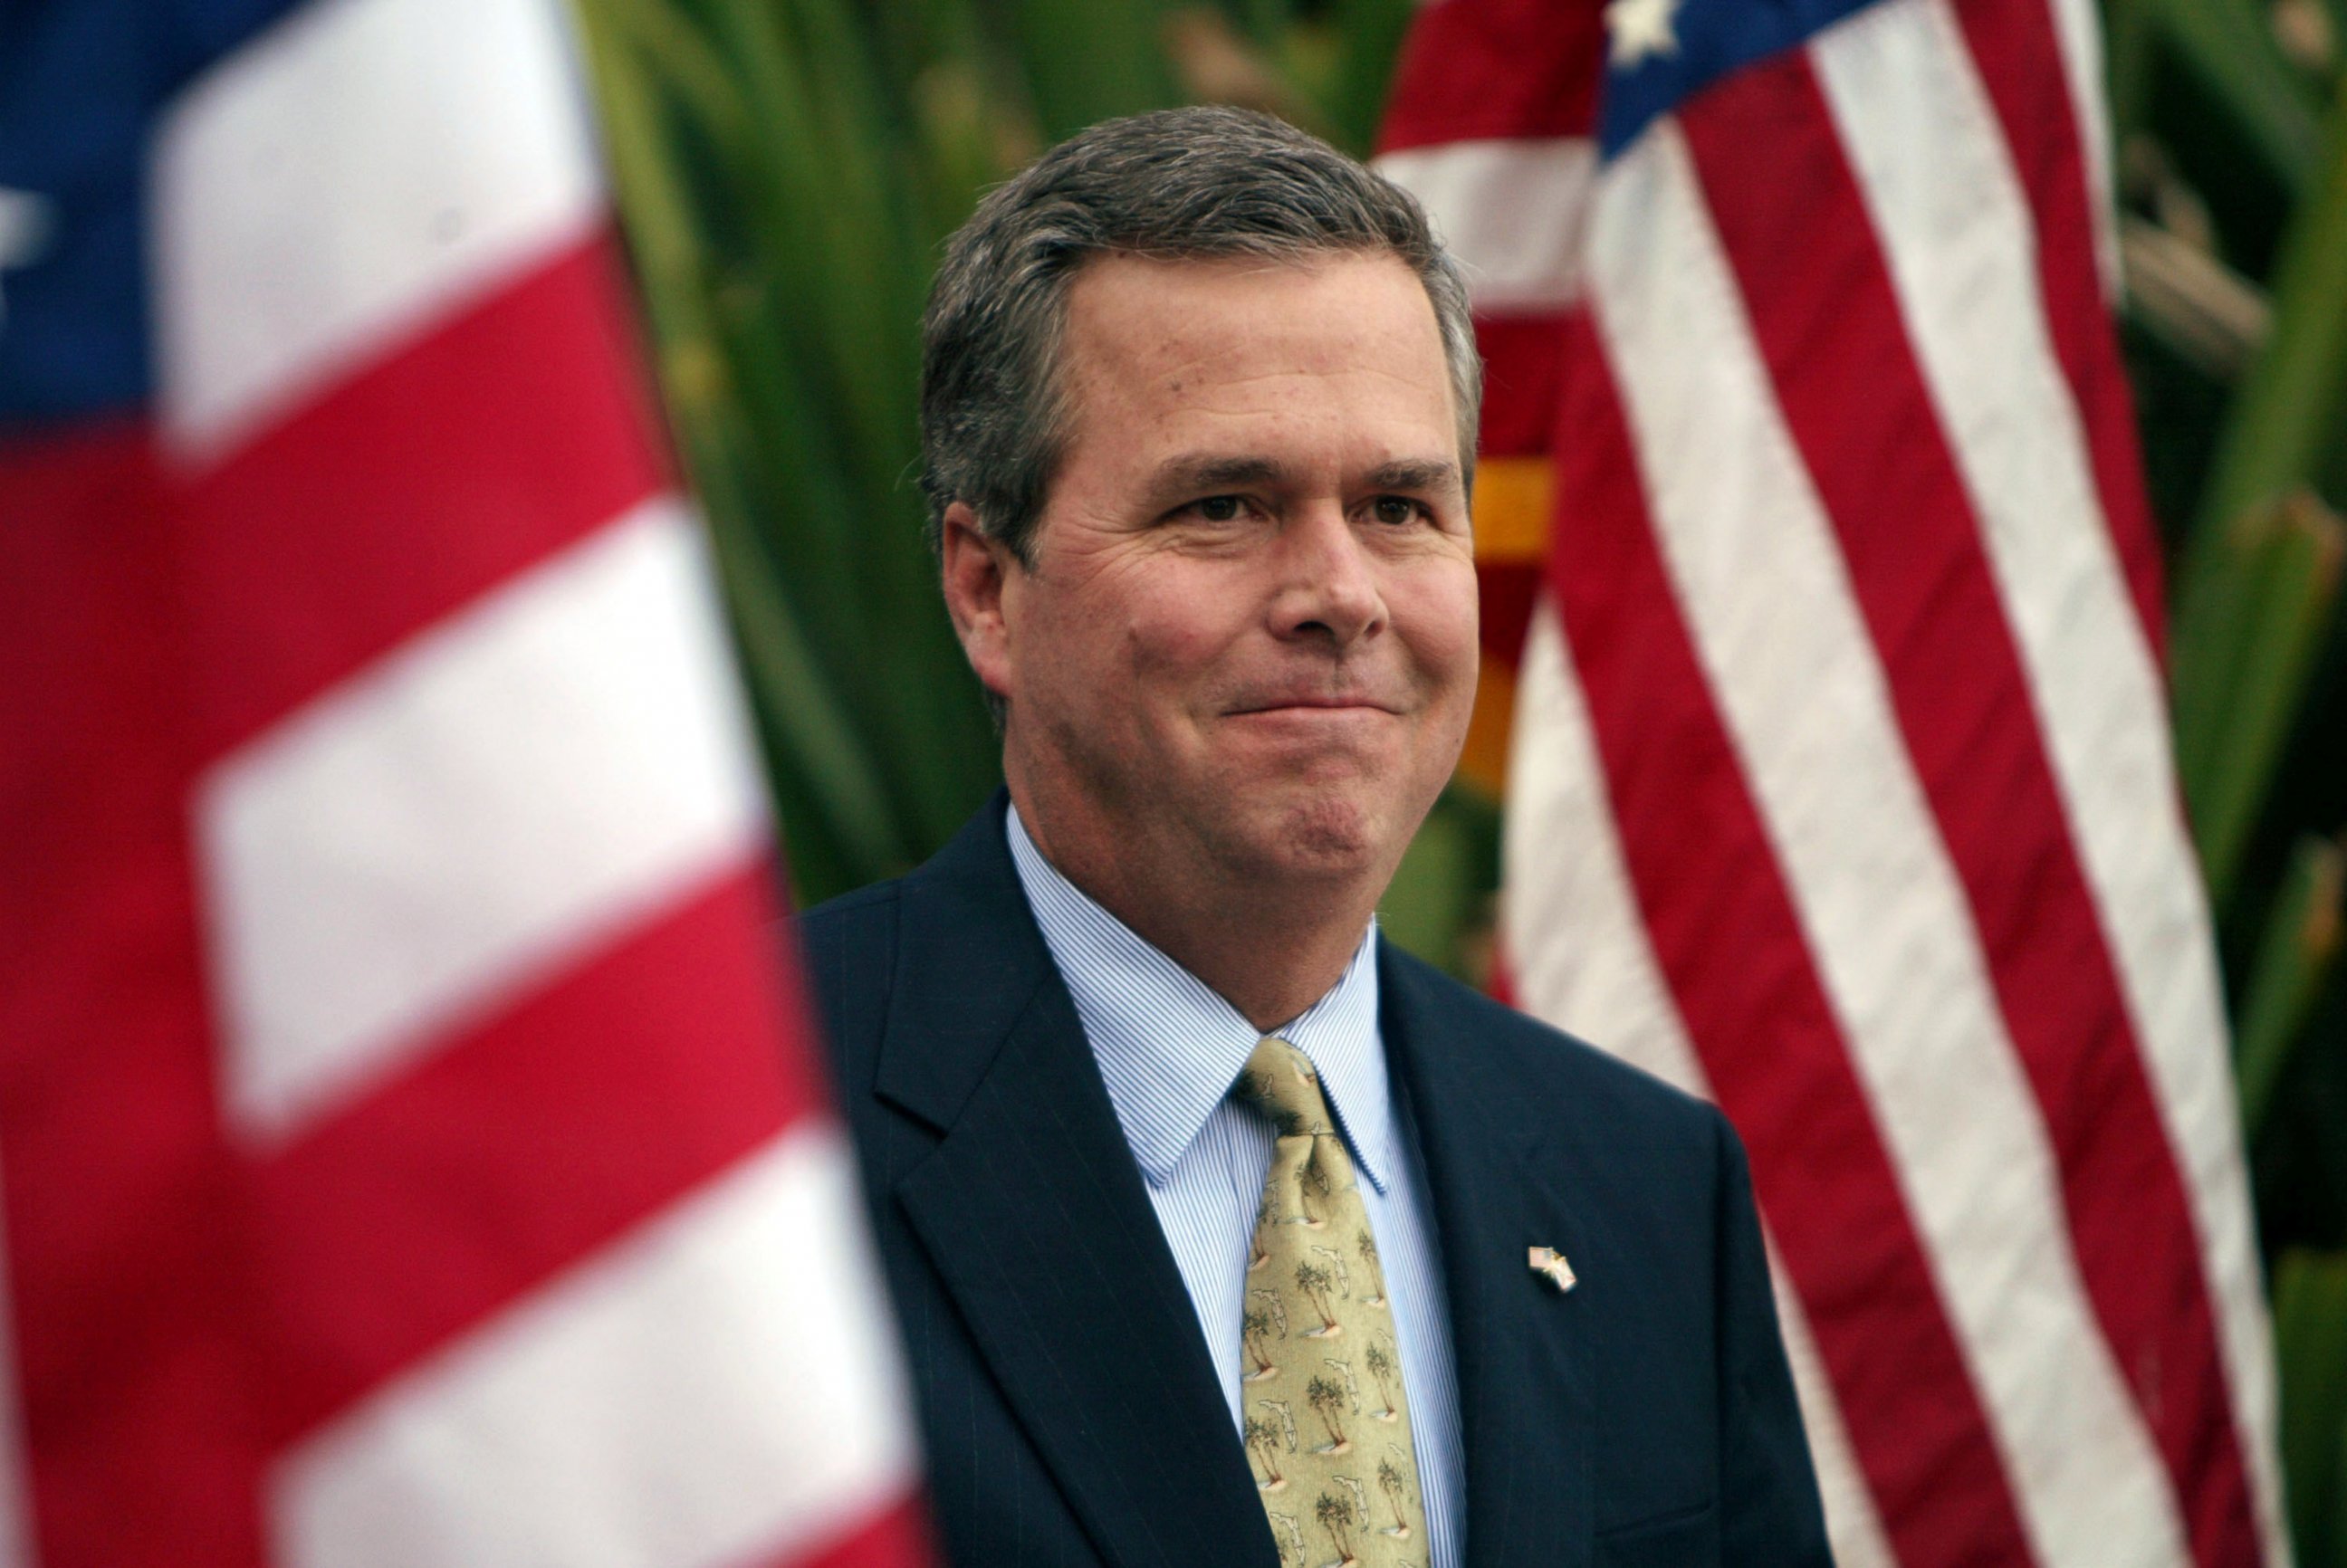 PHOTO: Florida Governor Jeb Bush delivers a stump speech in support of his brother President George W. Bush at the Southern Republican Leadership Conference, April 16, 2004 in Miami Beach, Fla. 